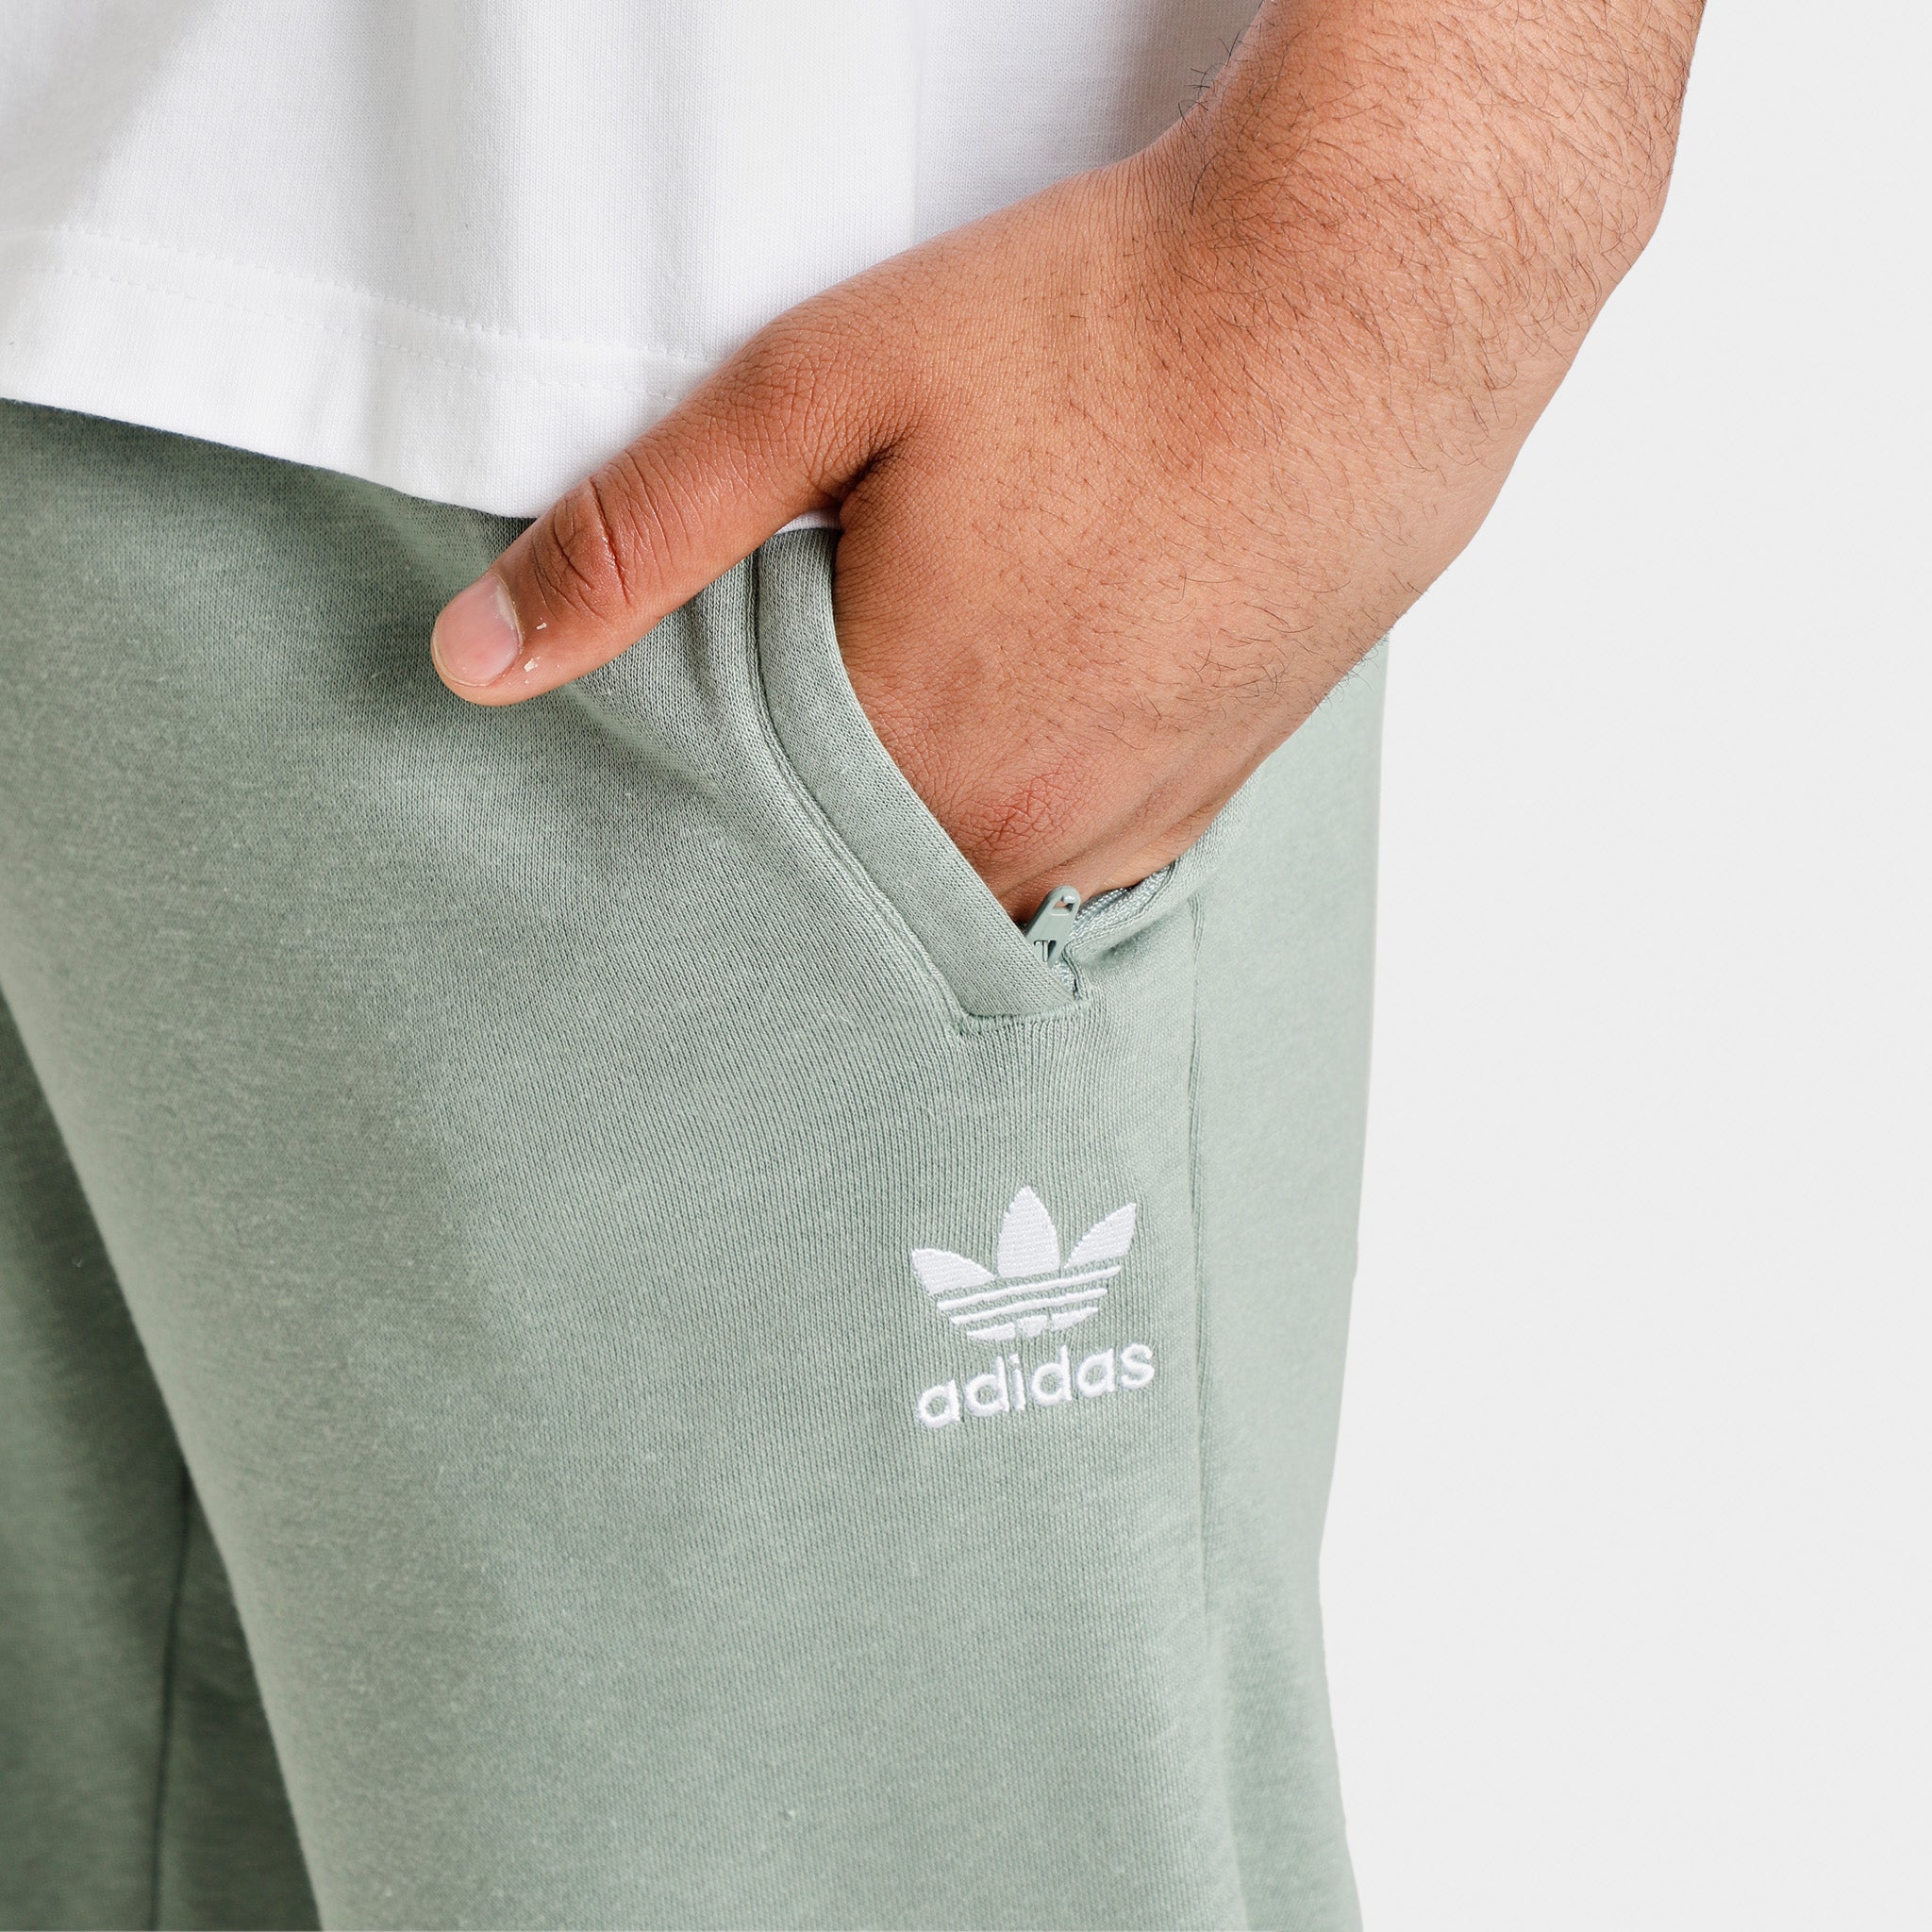 usd Hemp Online the Pants with Shop adidas for Silver 42.00 Originals Green / Essentials+ at Only Made